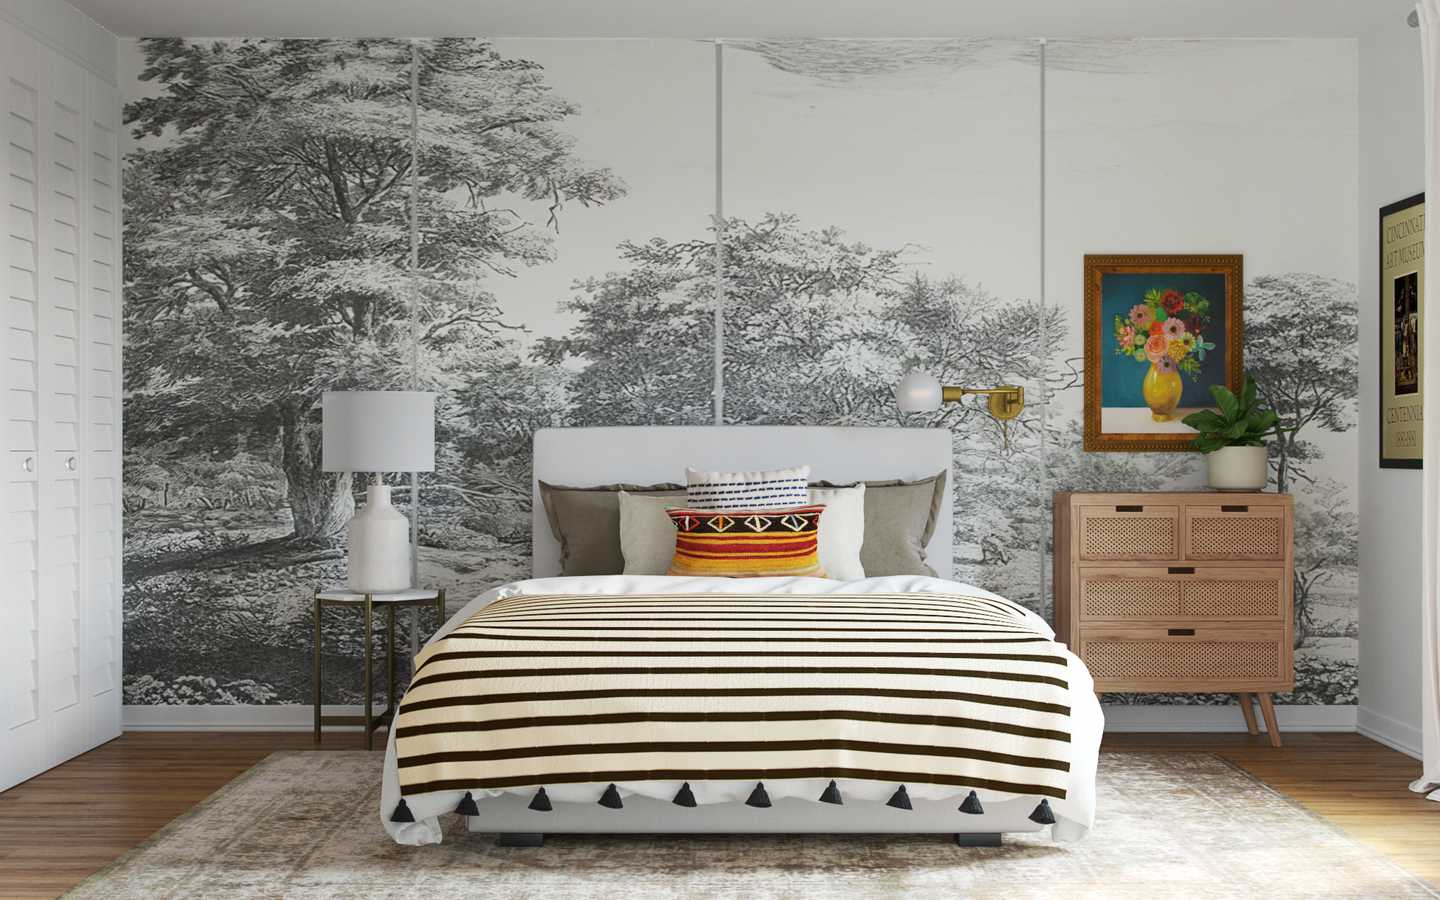 How to Make Eclectic Design Cohesive in the Bedroom | Havenly Blog ...